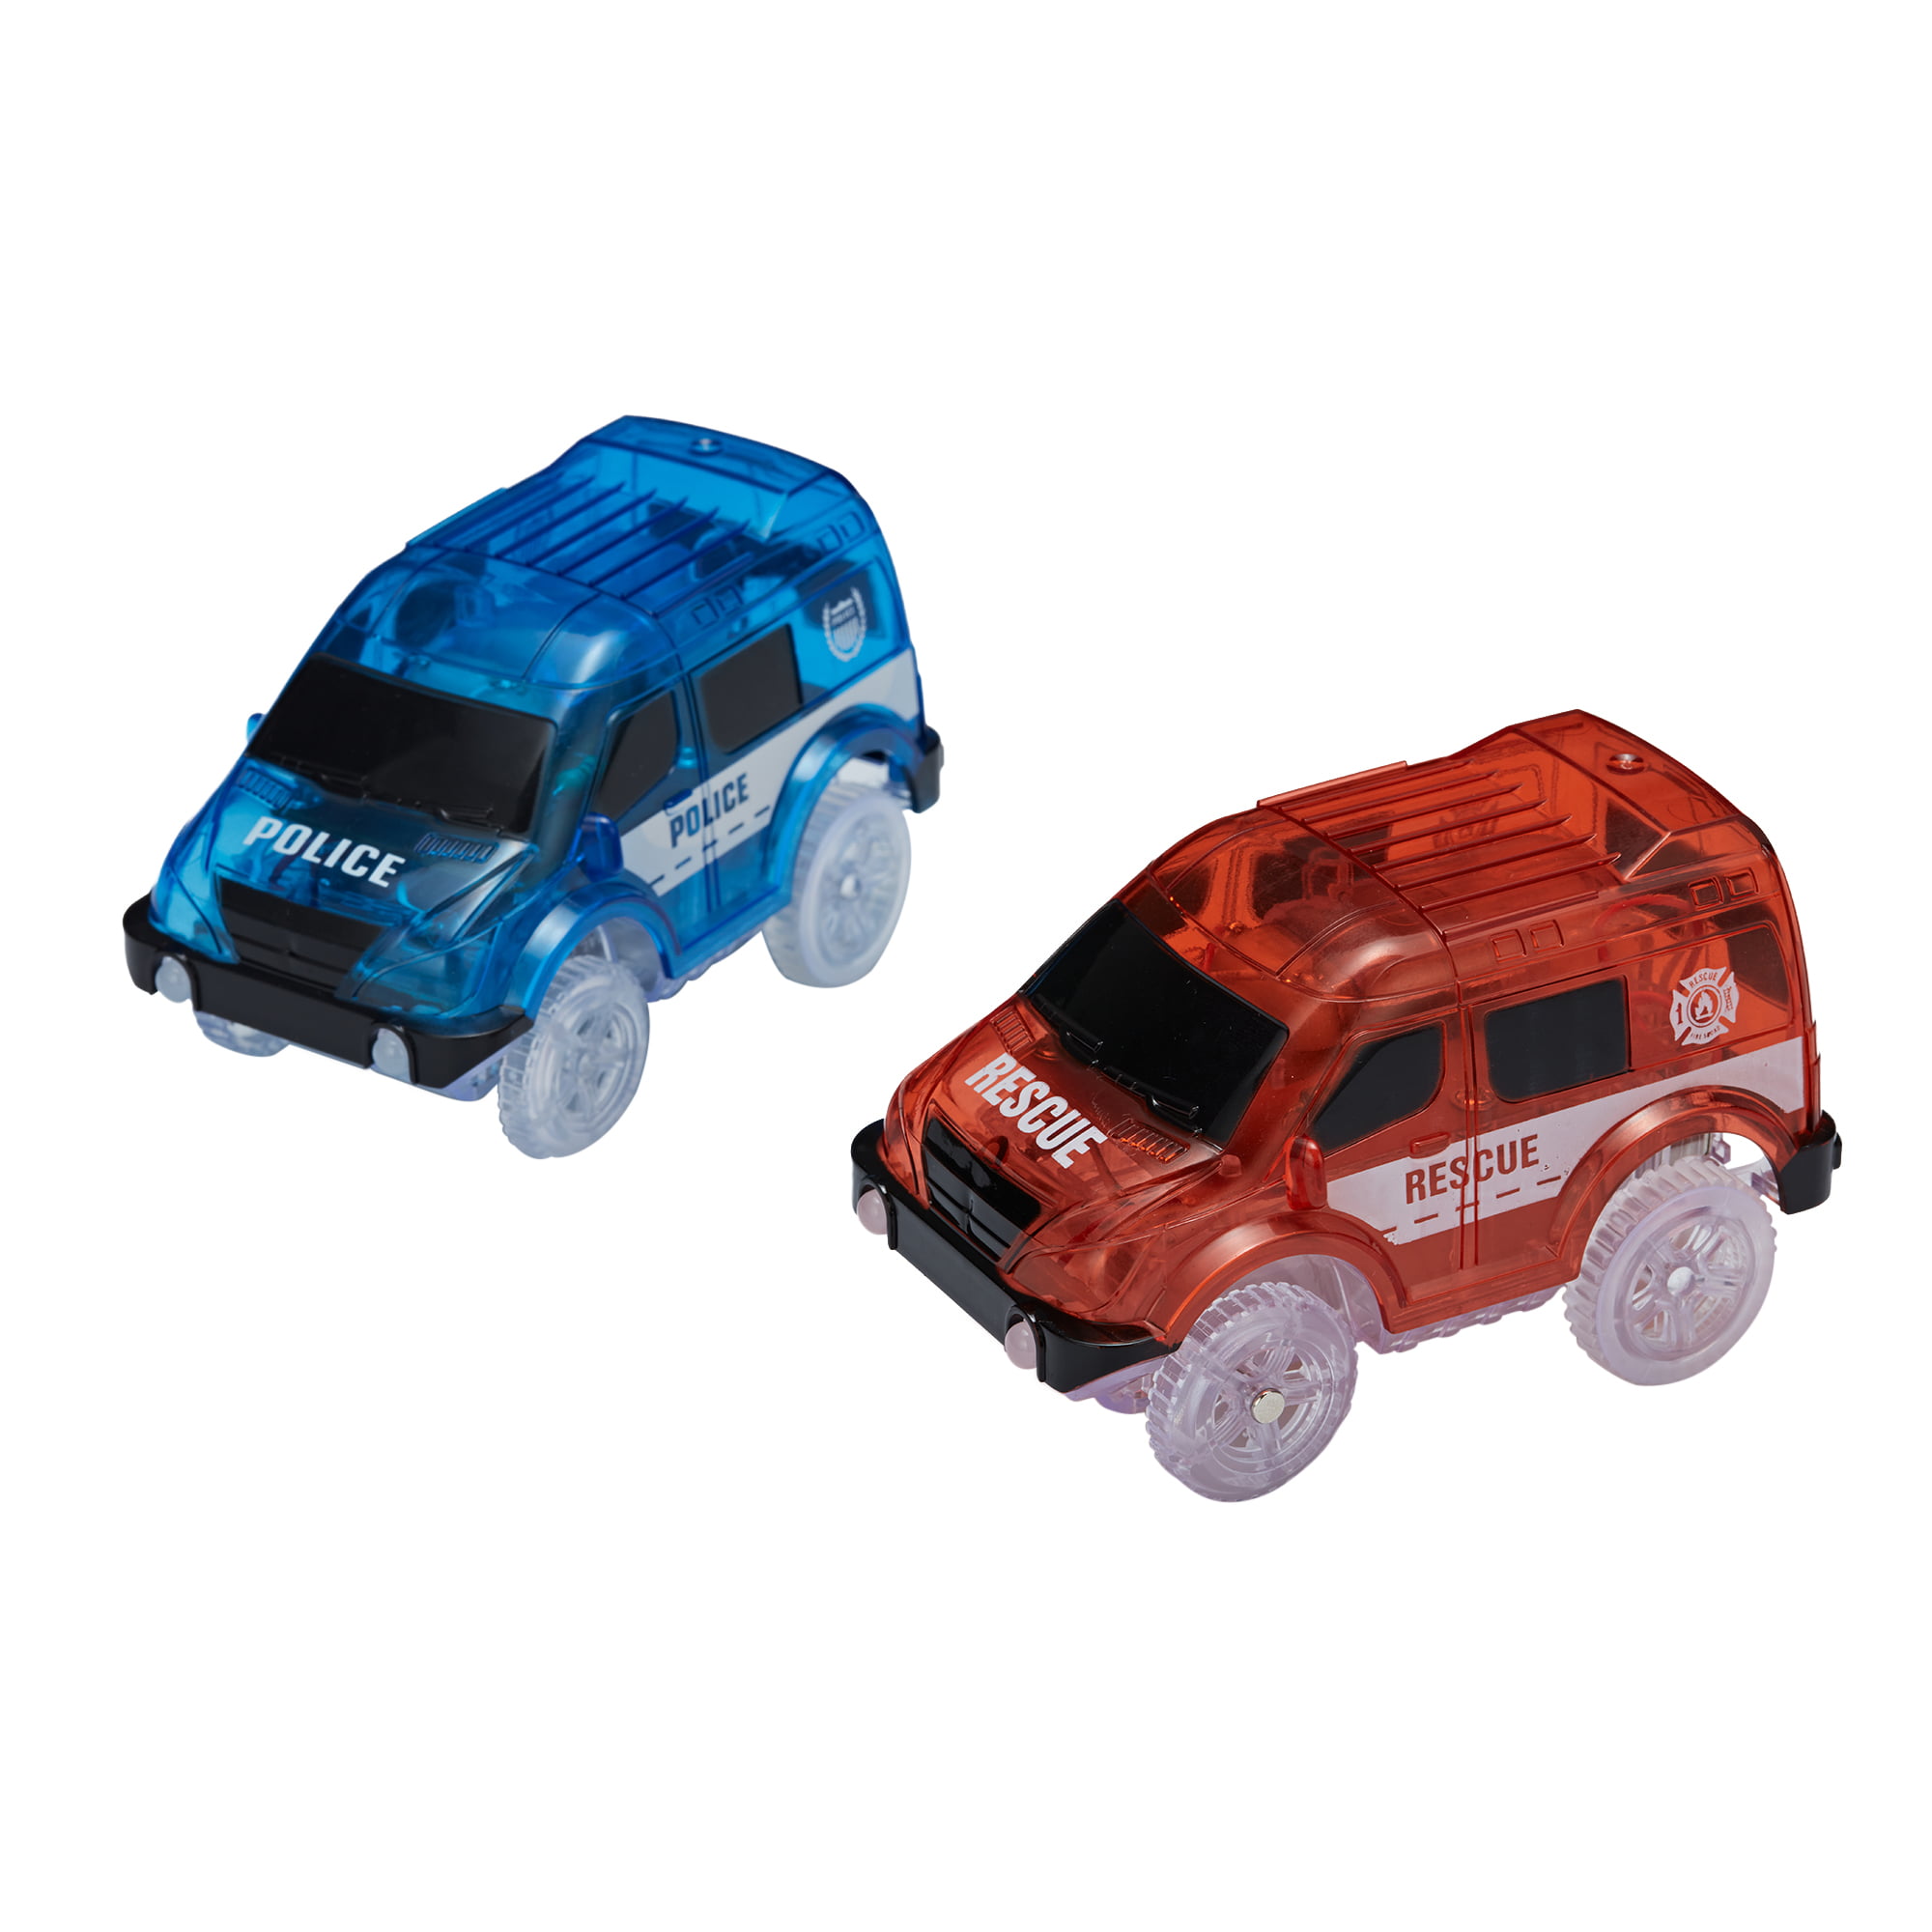 Track Cars Toy 2 Pack  Only Light Up Toy Cars Compatible with Magic 